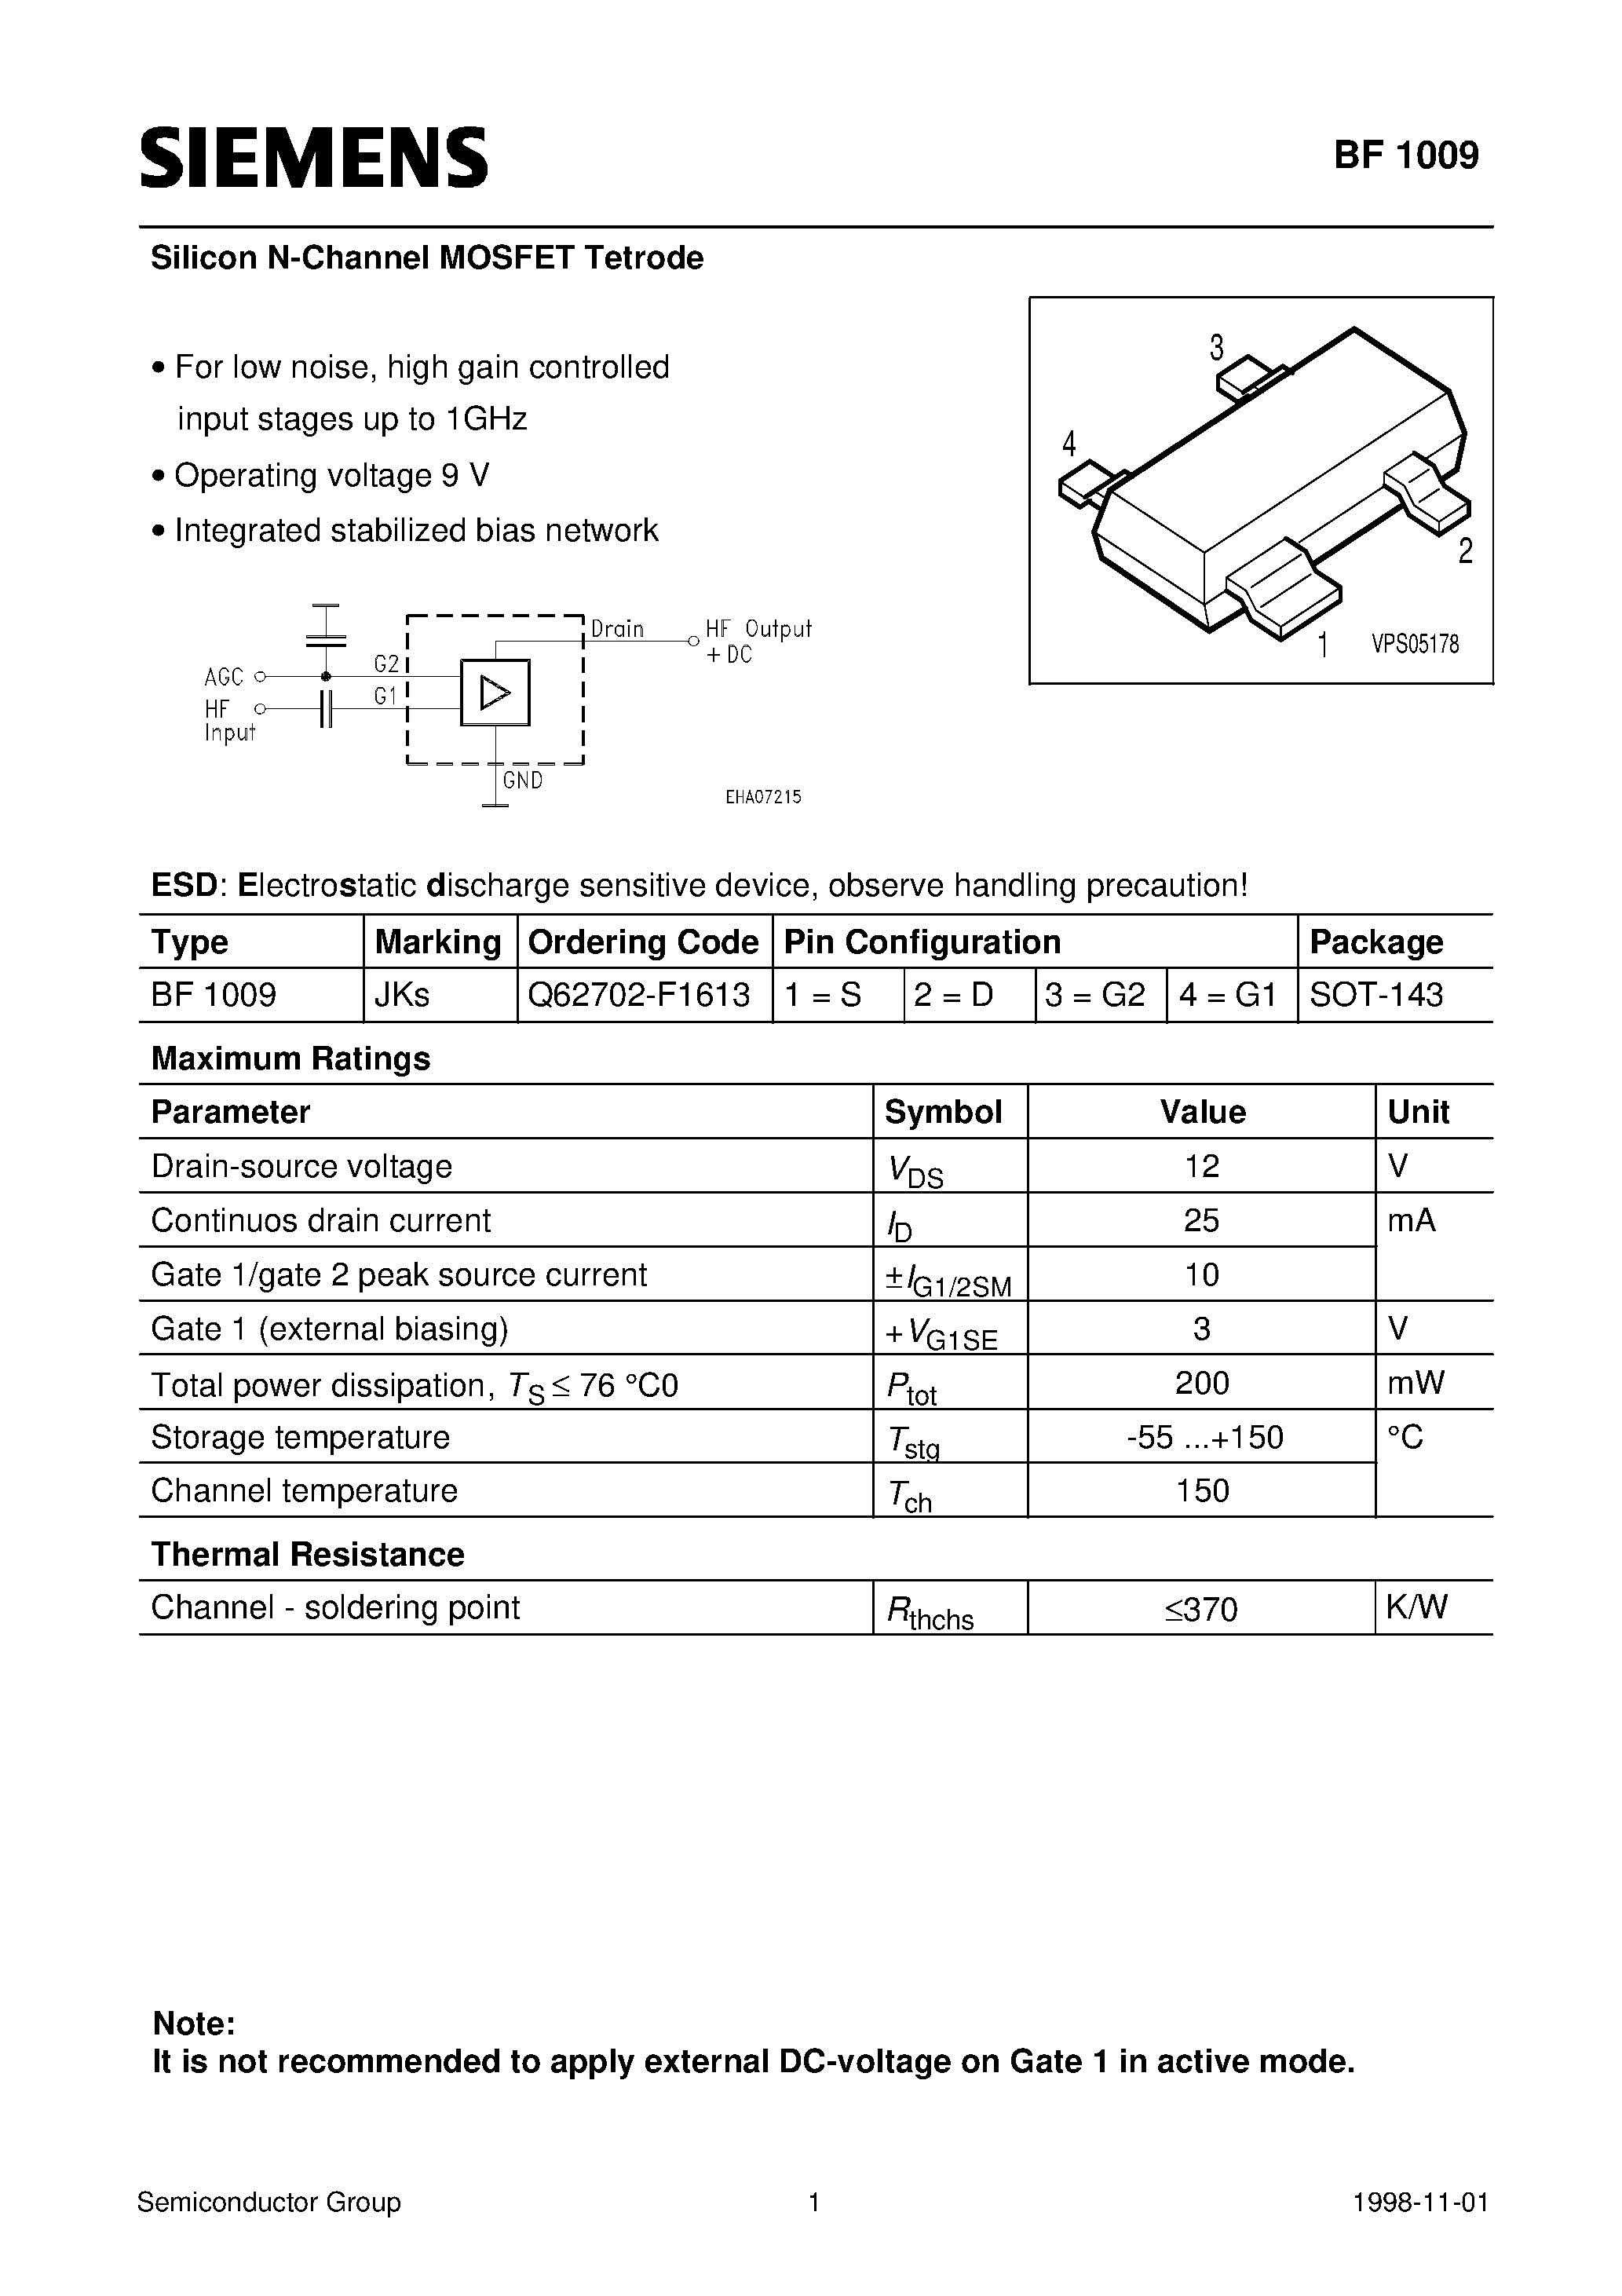 Даташит BF1009 - Silicon N-Channel MOSFET Tetrode (For low noise/ high gain controlled input stages up to 1GHz Operating voltage 9 V Integrated stabilized bias network страница 1